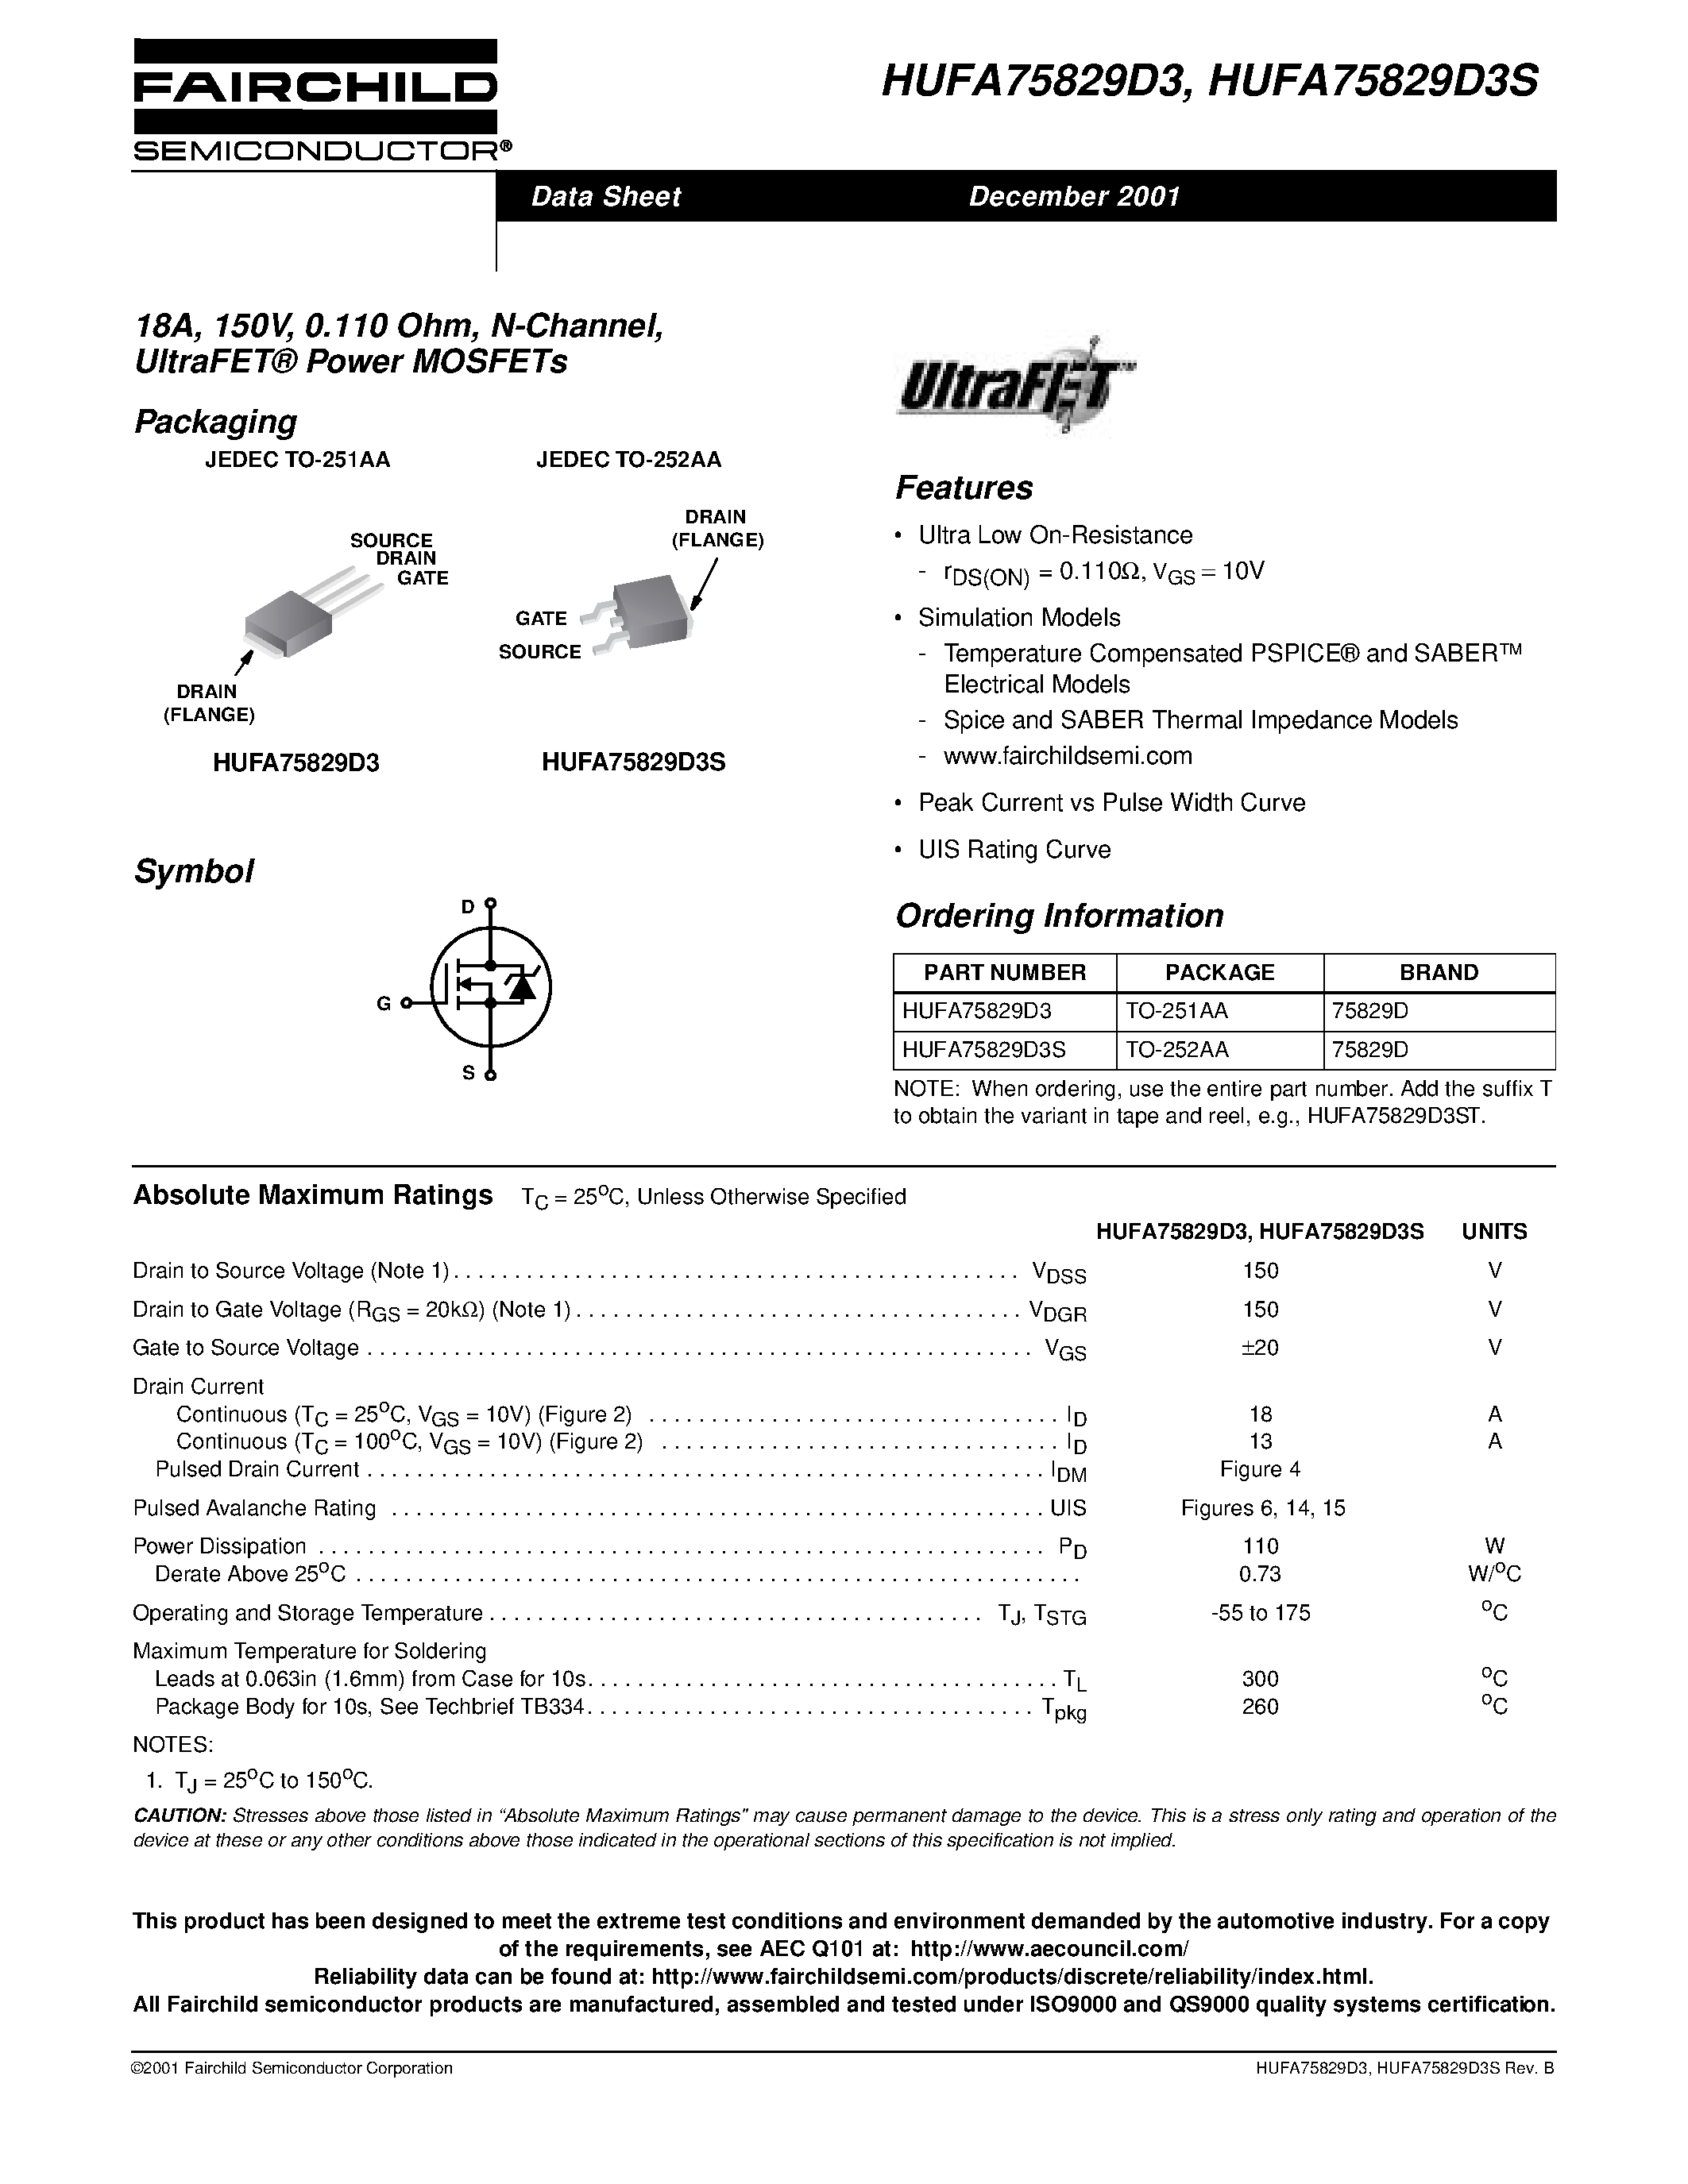 Datasheet HUFA75829D3 - 18A/ 150V/ 0.110 Ohm/ N-Channel/ UltraFET Power MOSFETs page 1